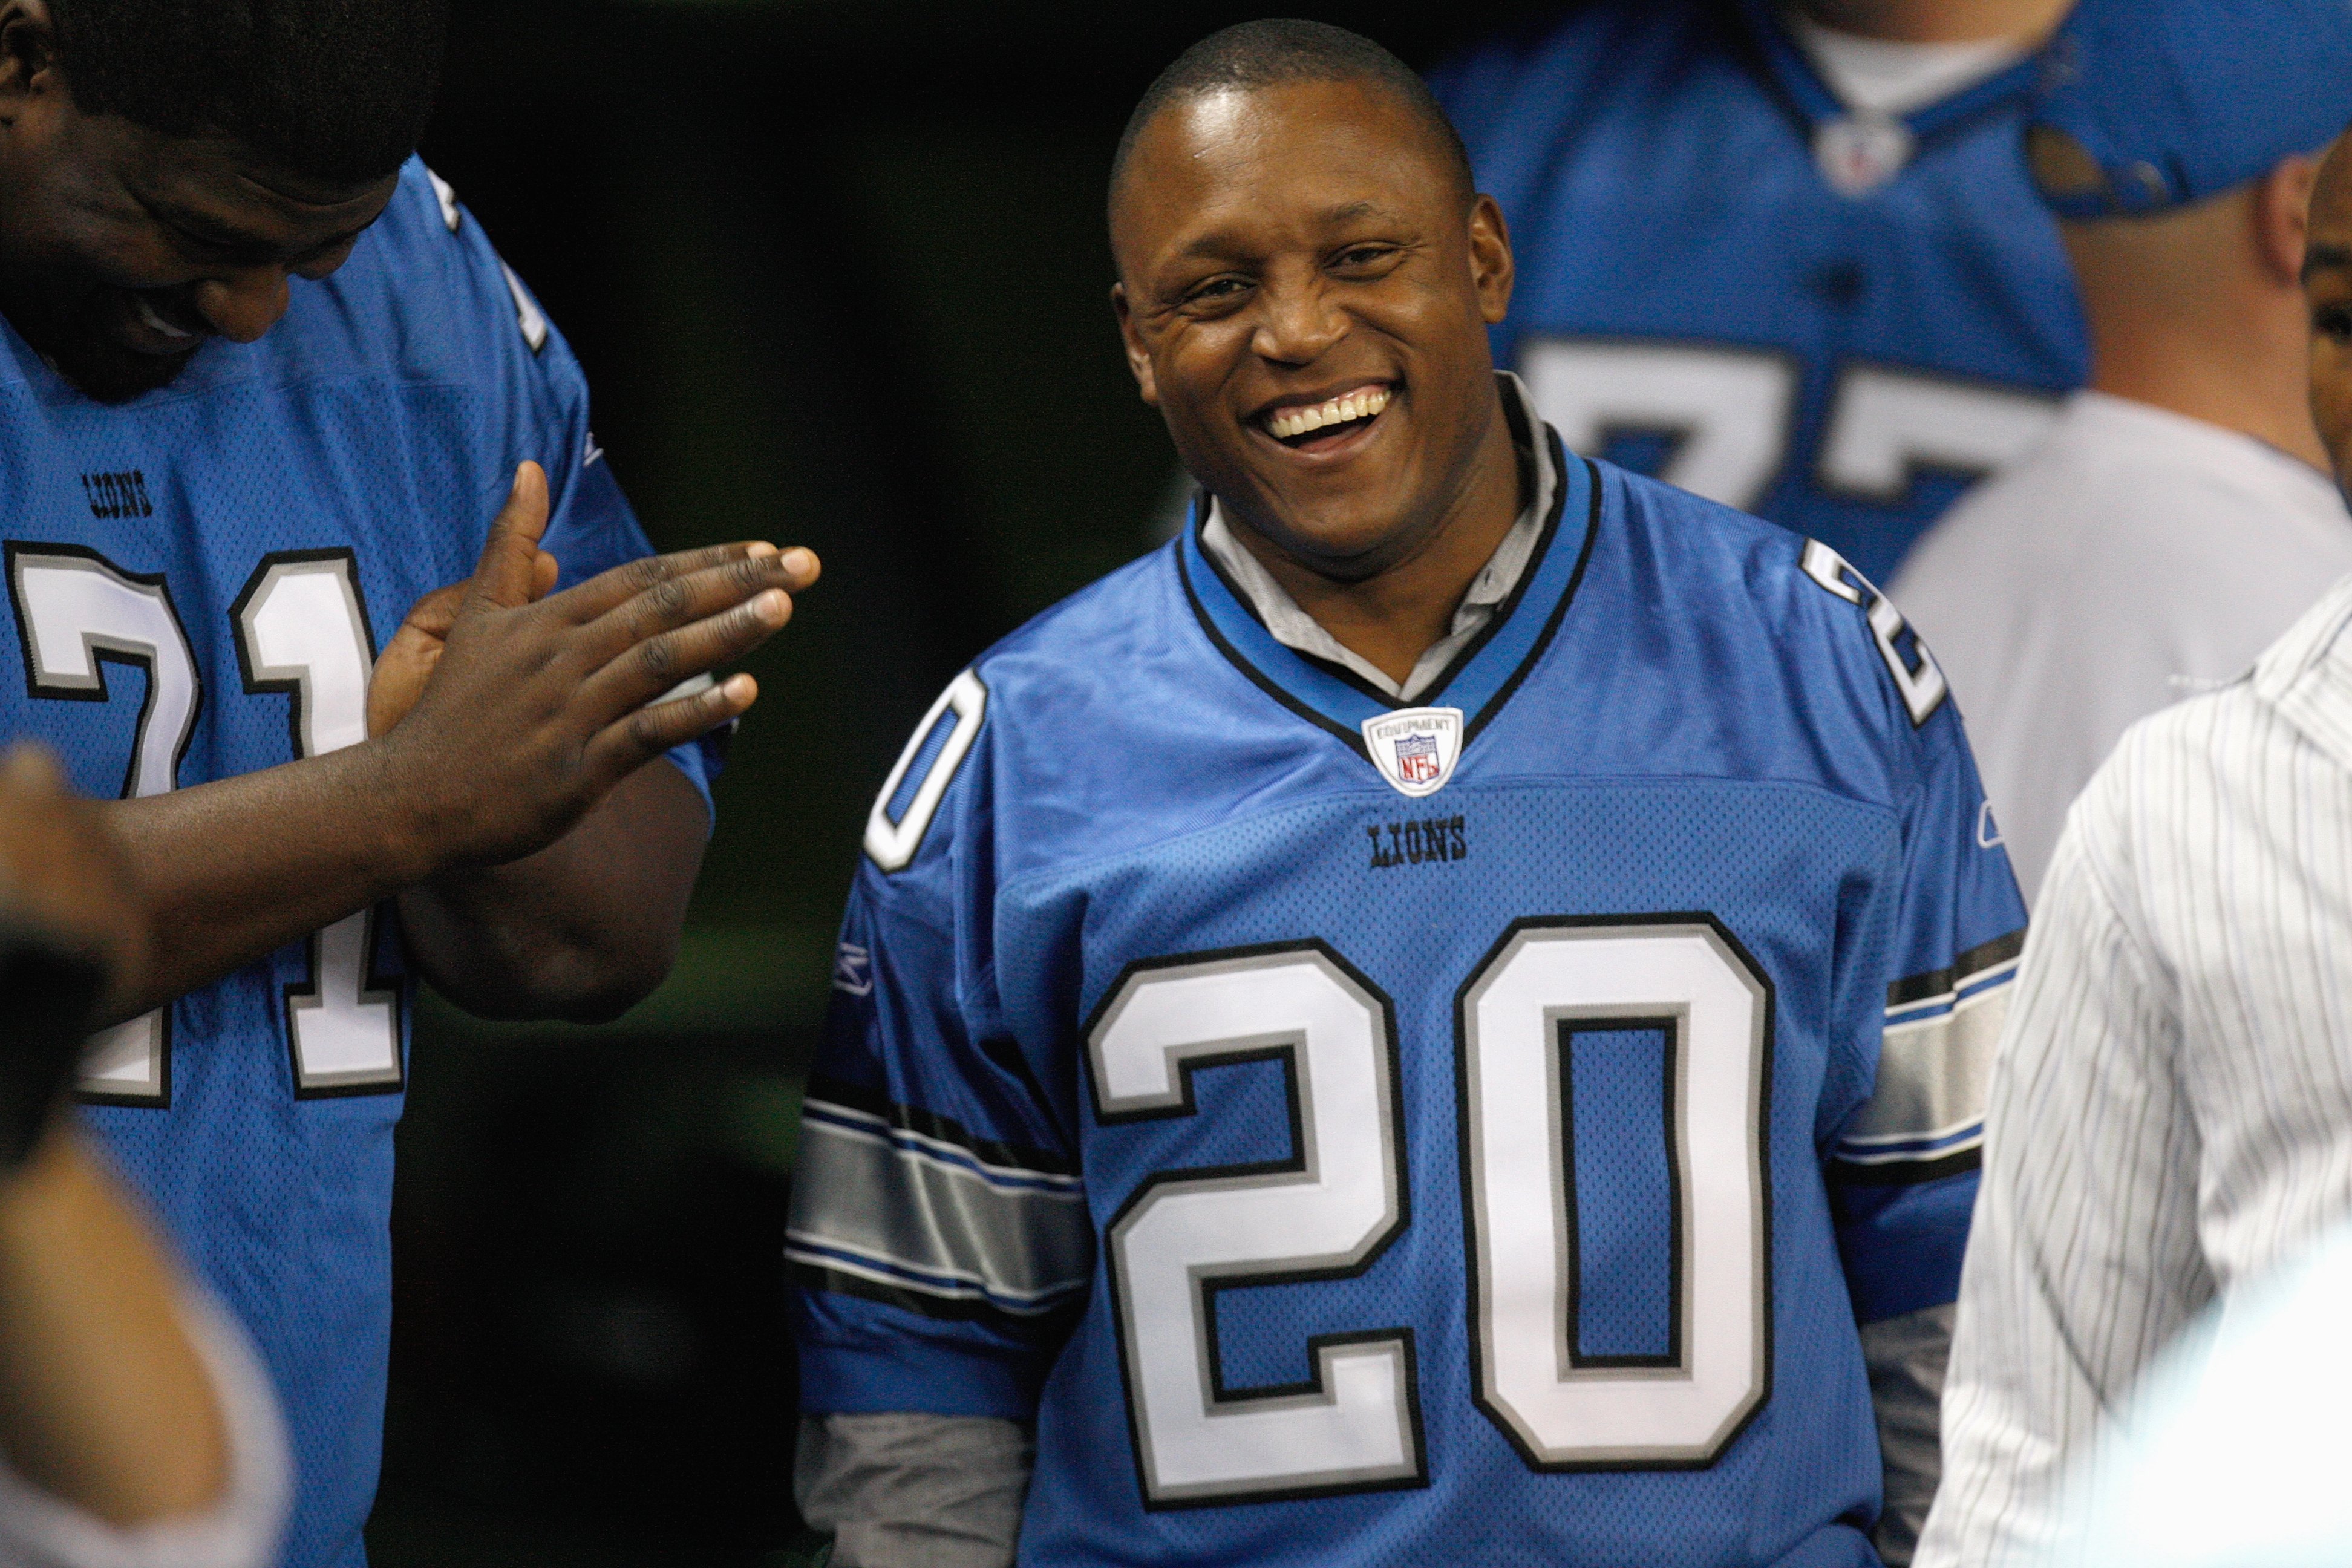 I loved me some Barry Sanders and the Detroit Lions back when the Oilers left town.